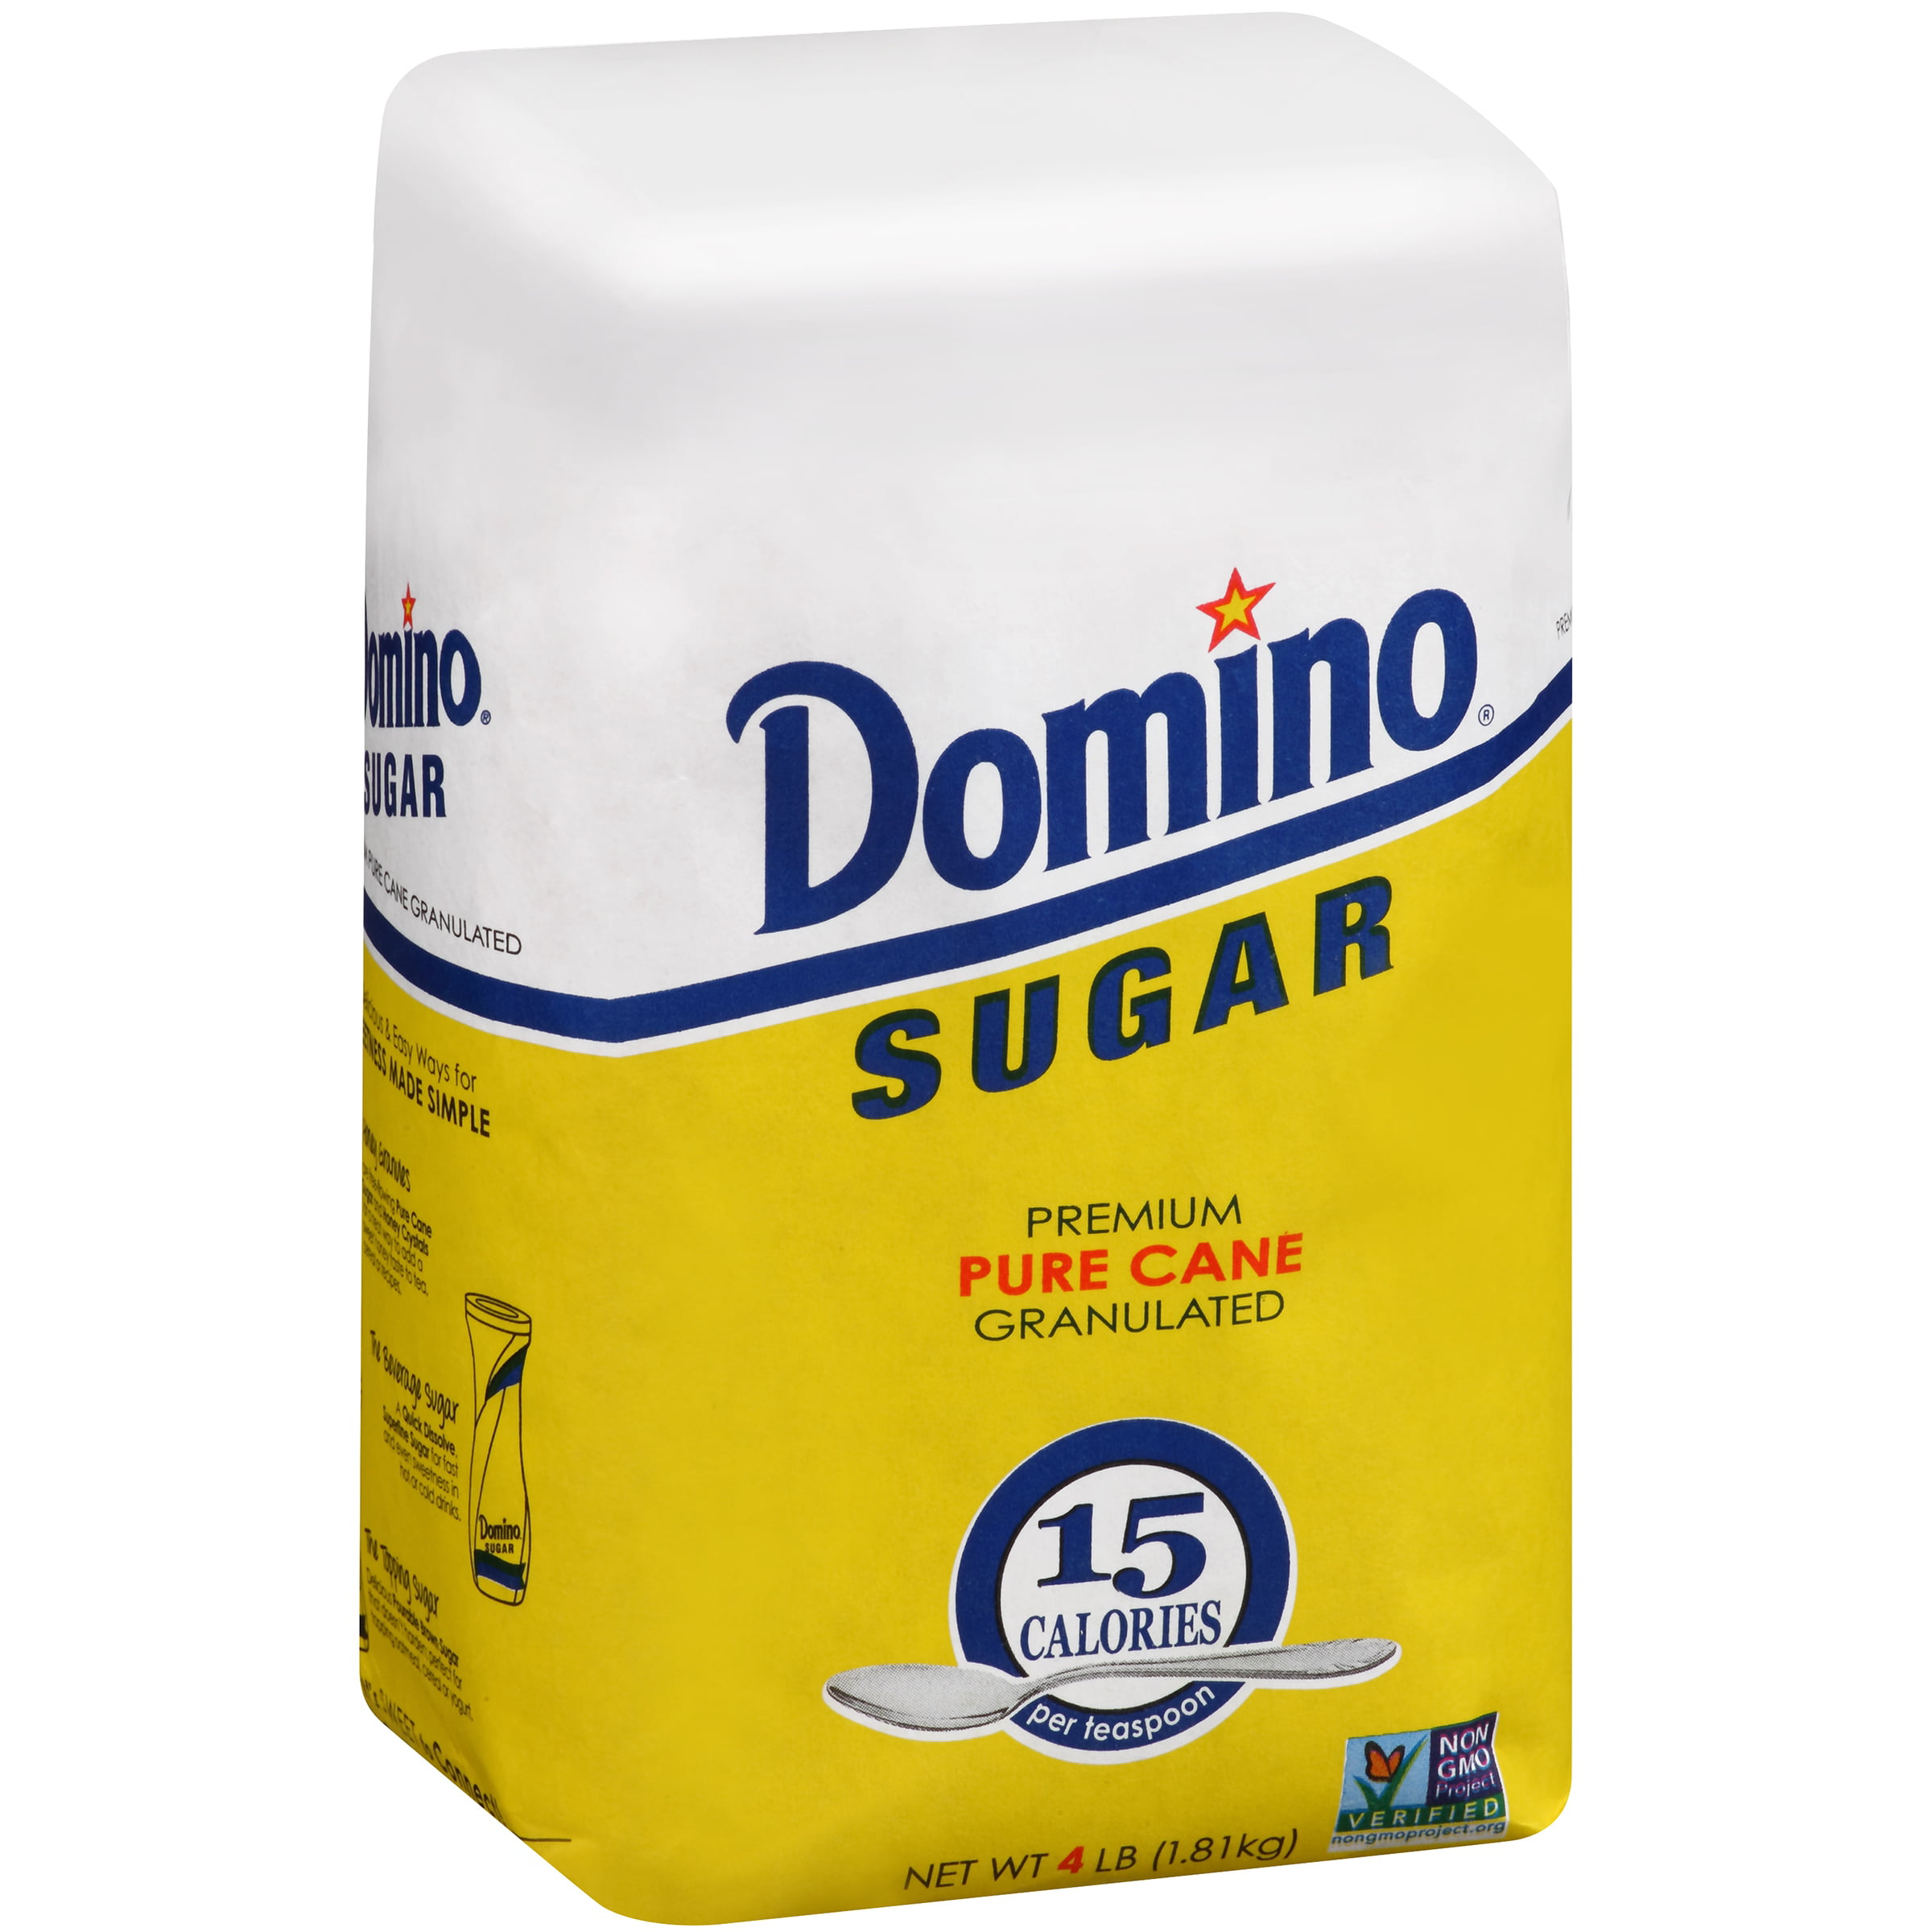 How many cups are in a 5-pound bag of sugar?